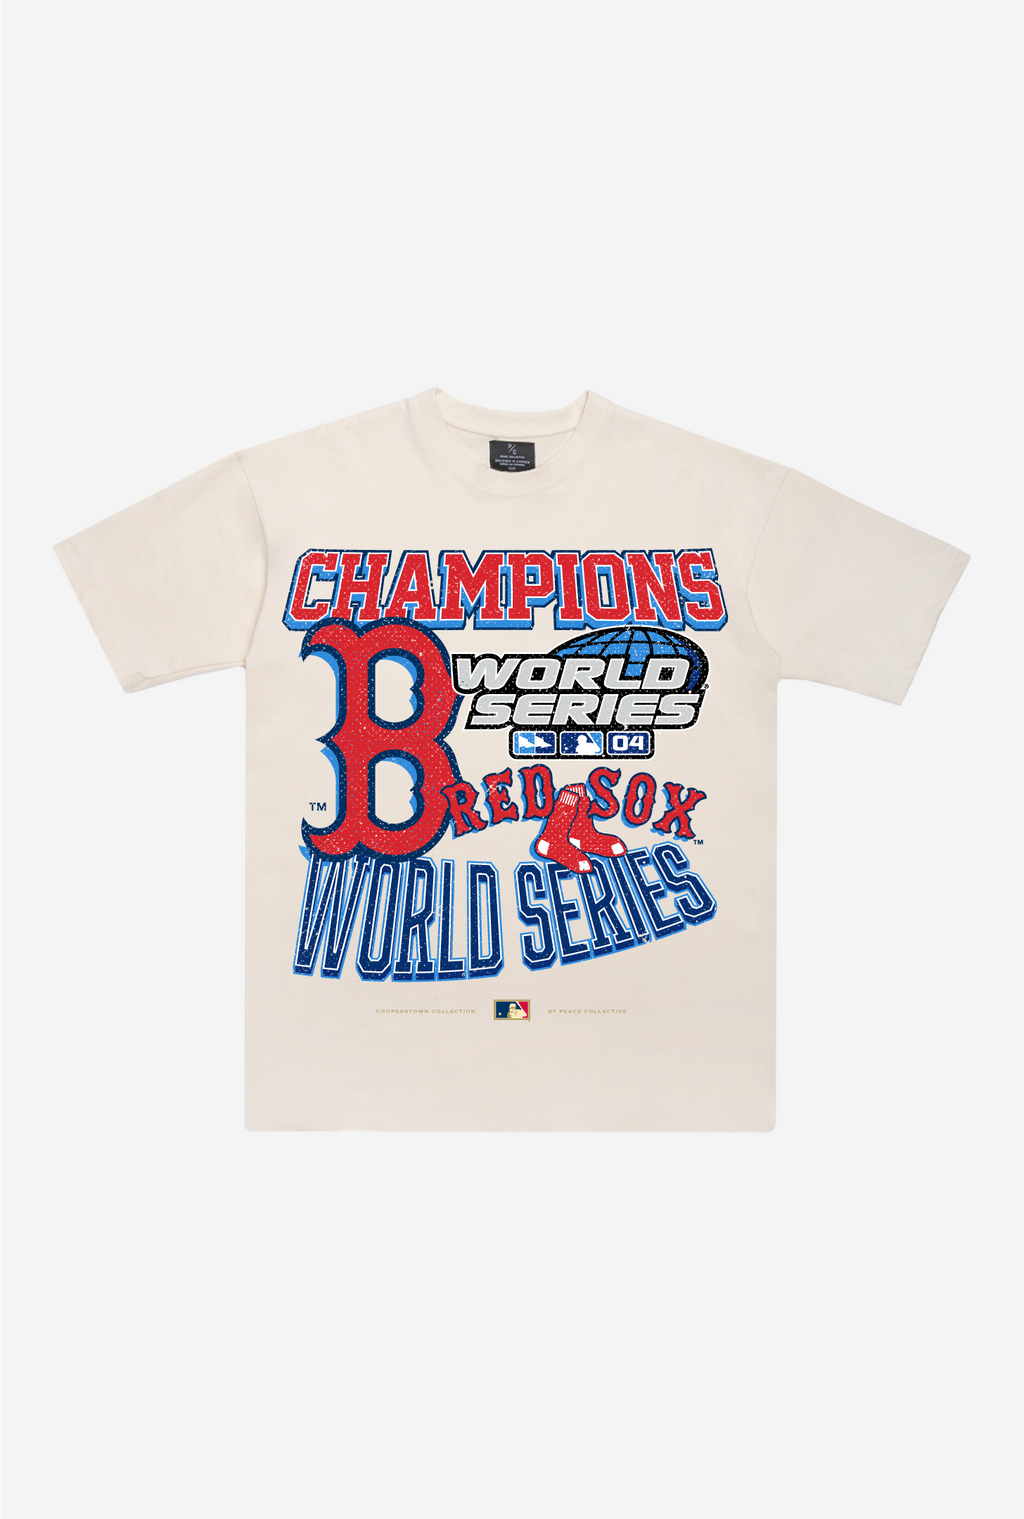 Boston Red Sox 2004 World Series Cooperstown Collection Premium T-Shir